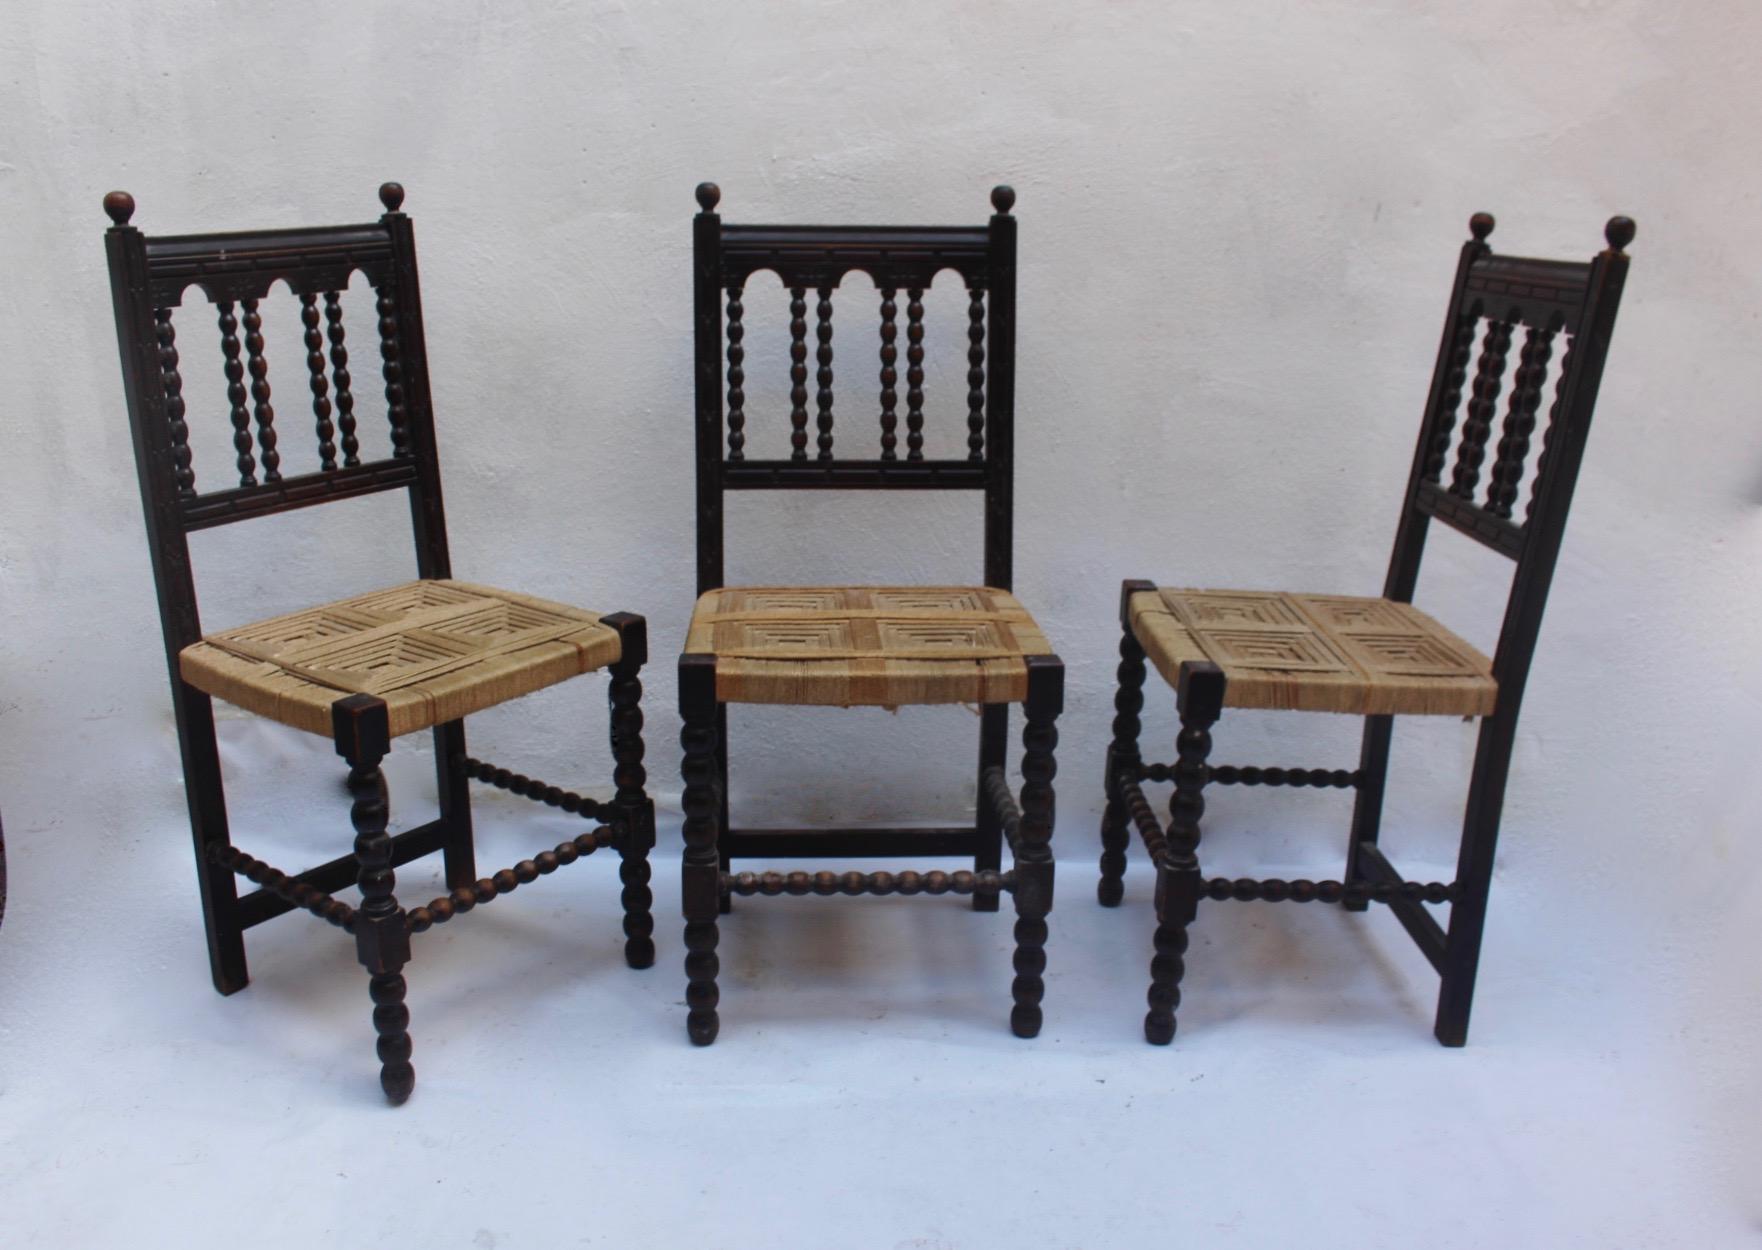 Baroque Revival Wood and Woven Dining Chair Made in Spain, 19th Century 1